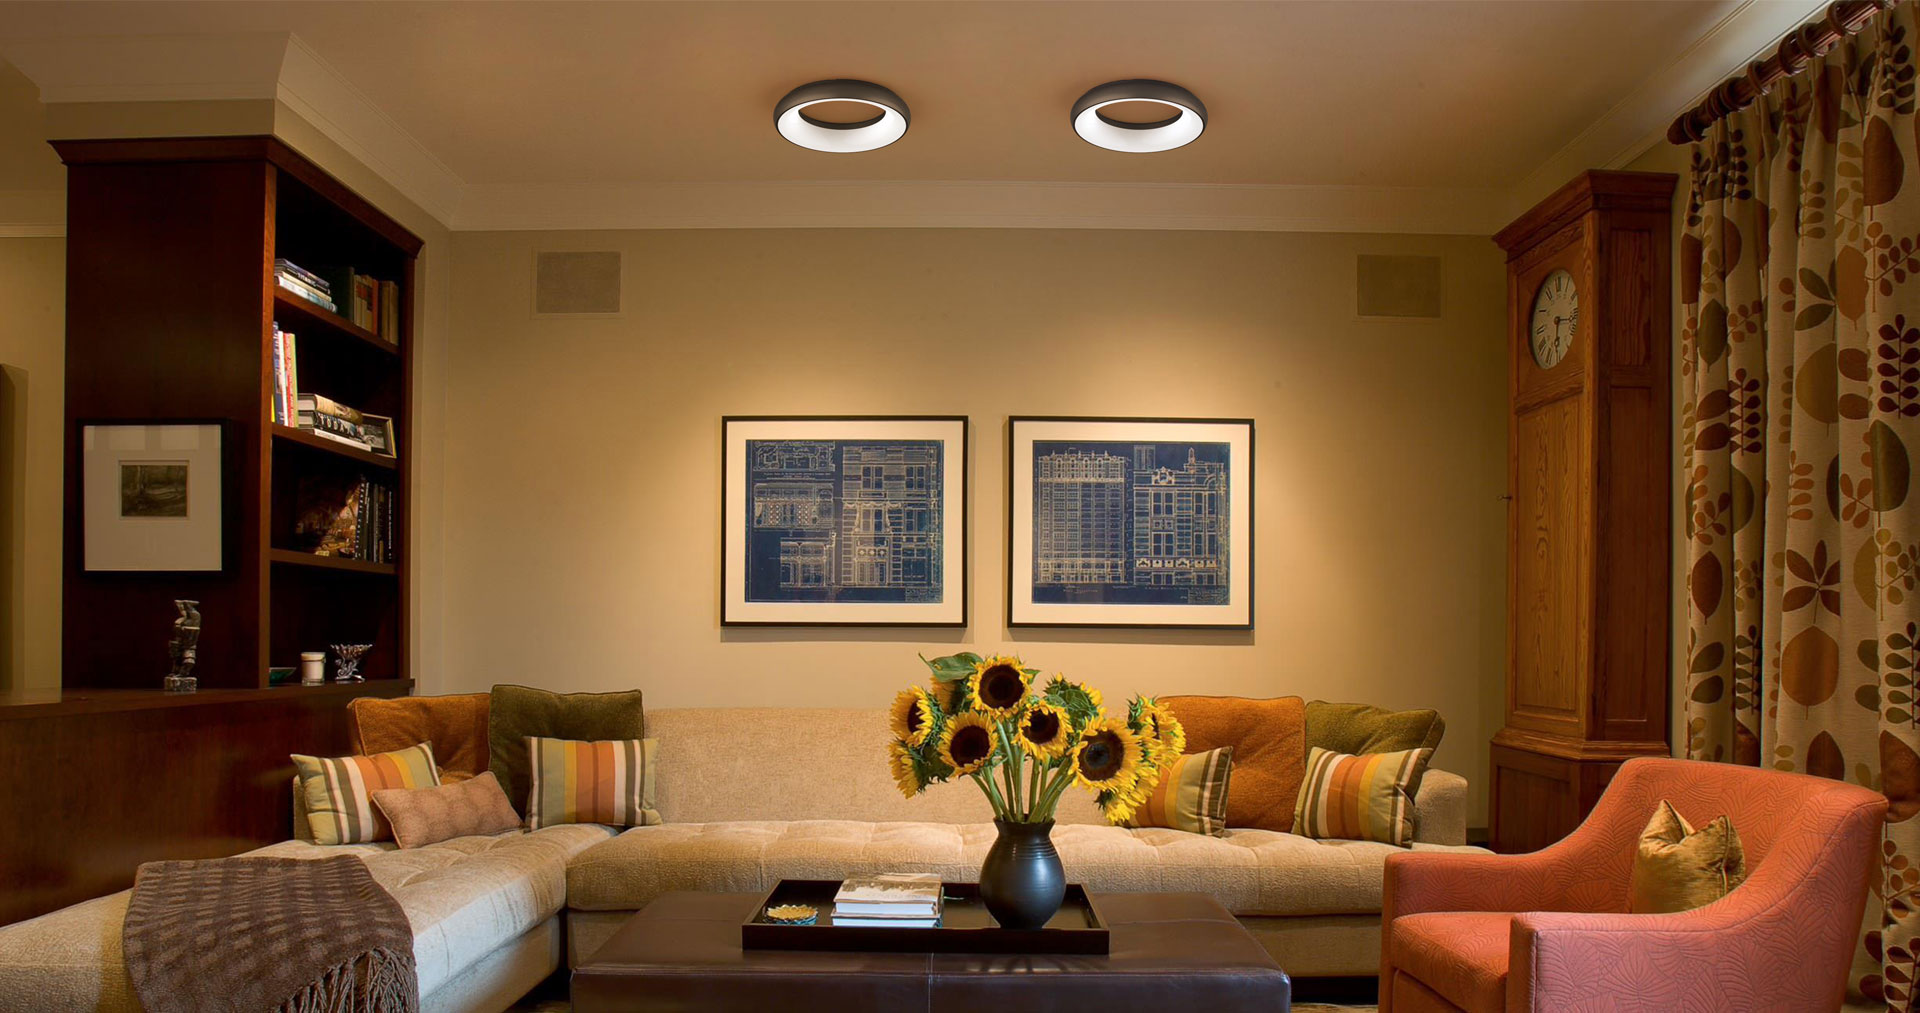 asiantechdesigners: Best Way To Light A Living Room Without Ceiling Light